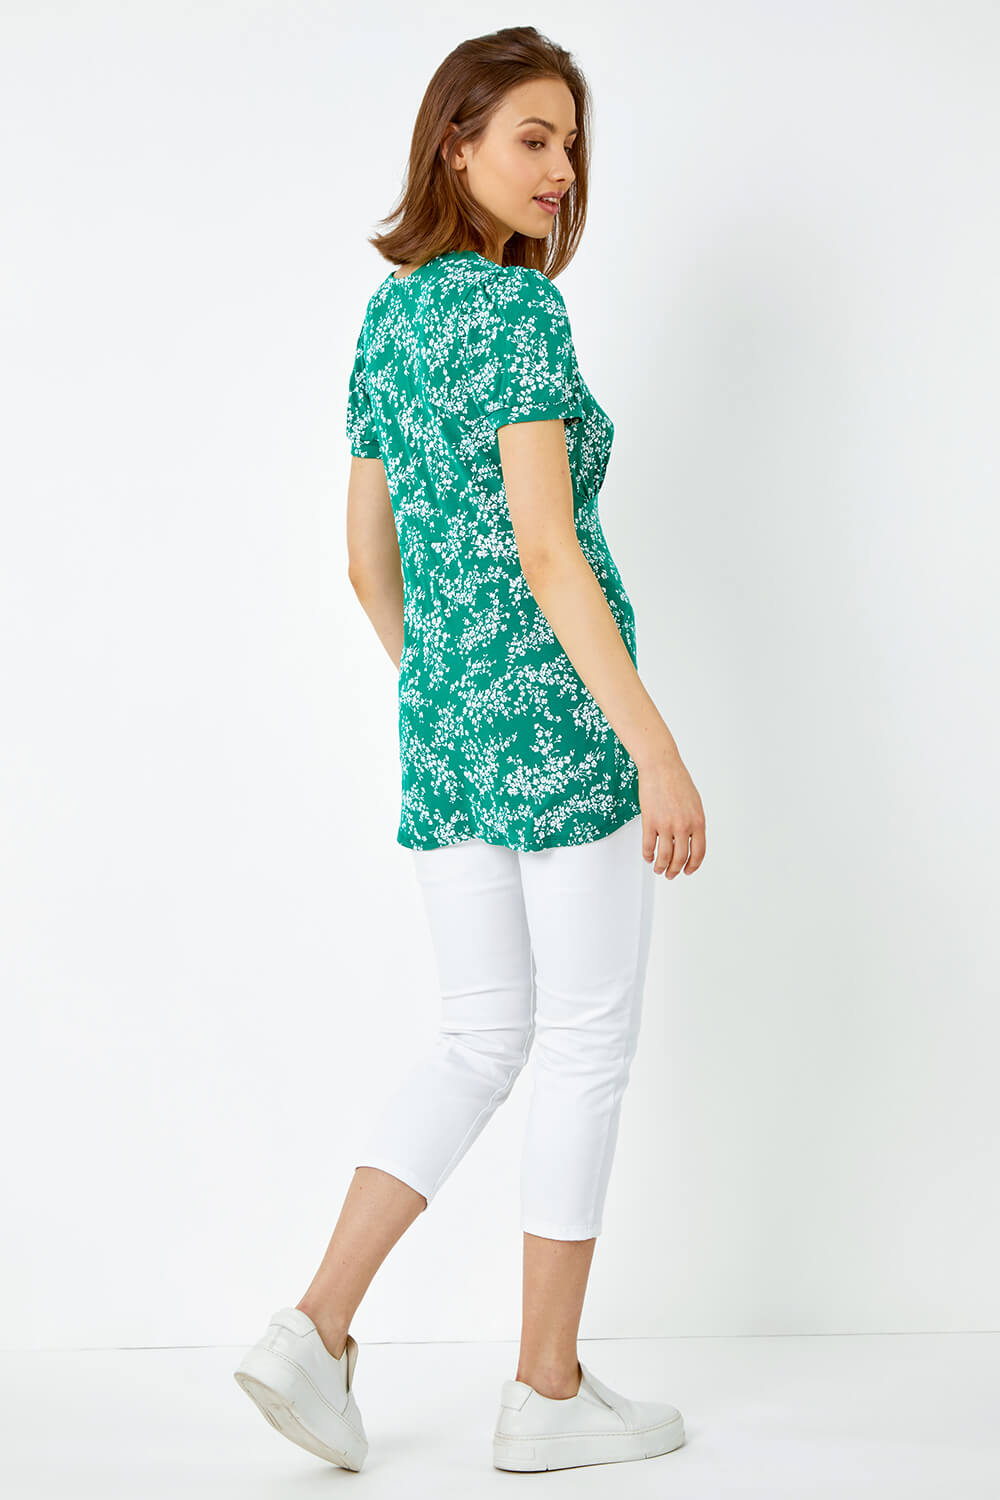 Green Ditsy Floral Print Stretch T-Shirt, Image 3 of 5